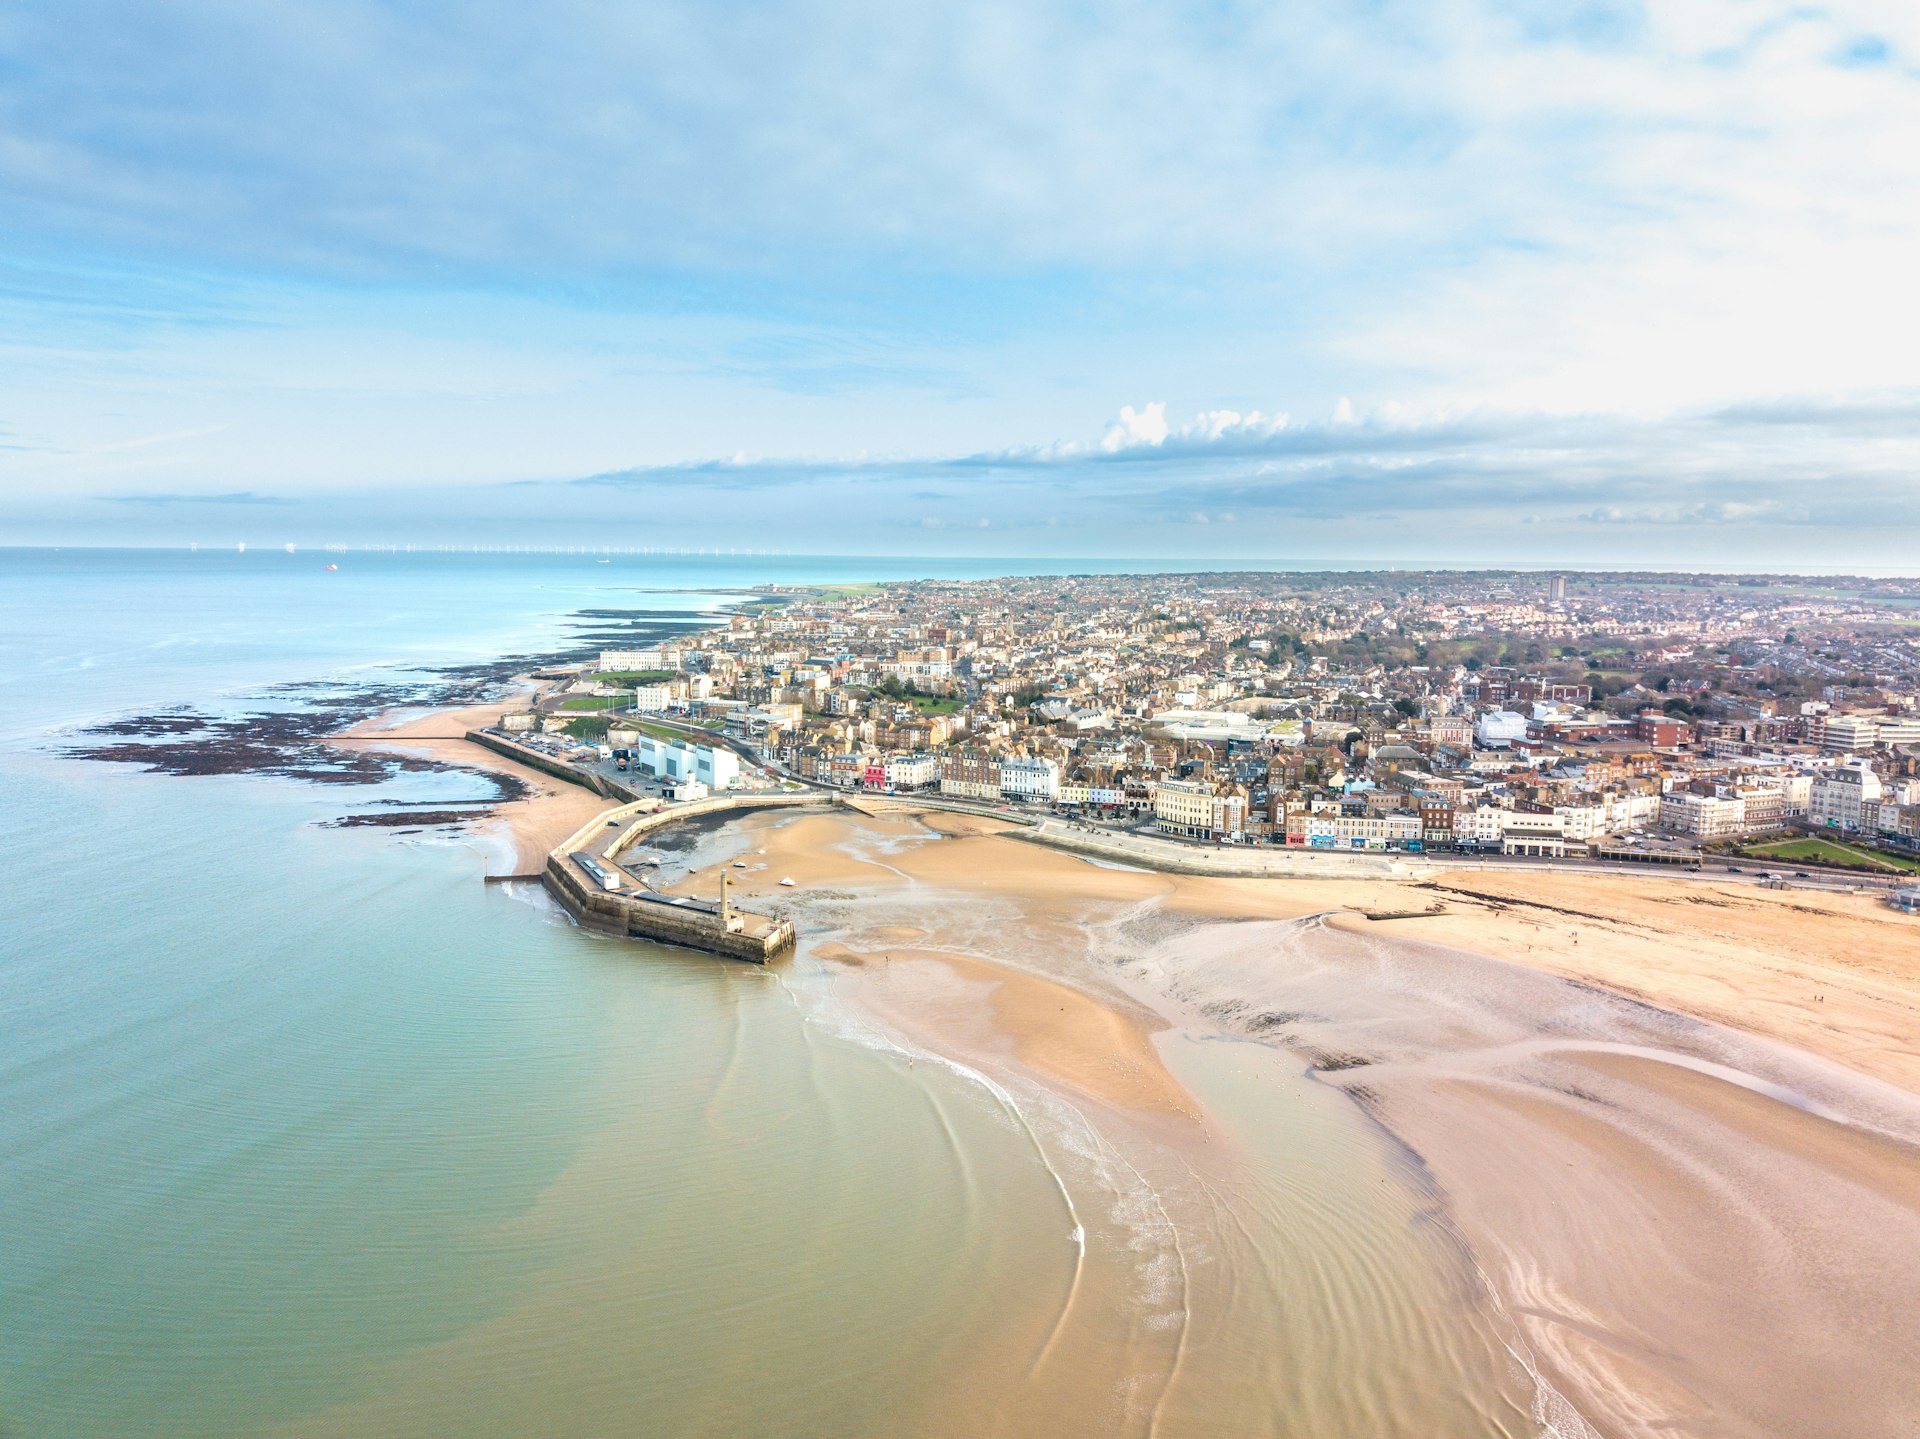 Aerial view of a curve of golden sand in Margate, England, with a concrete harbor arm stretching out into the sea